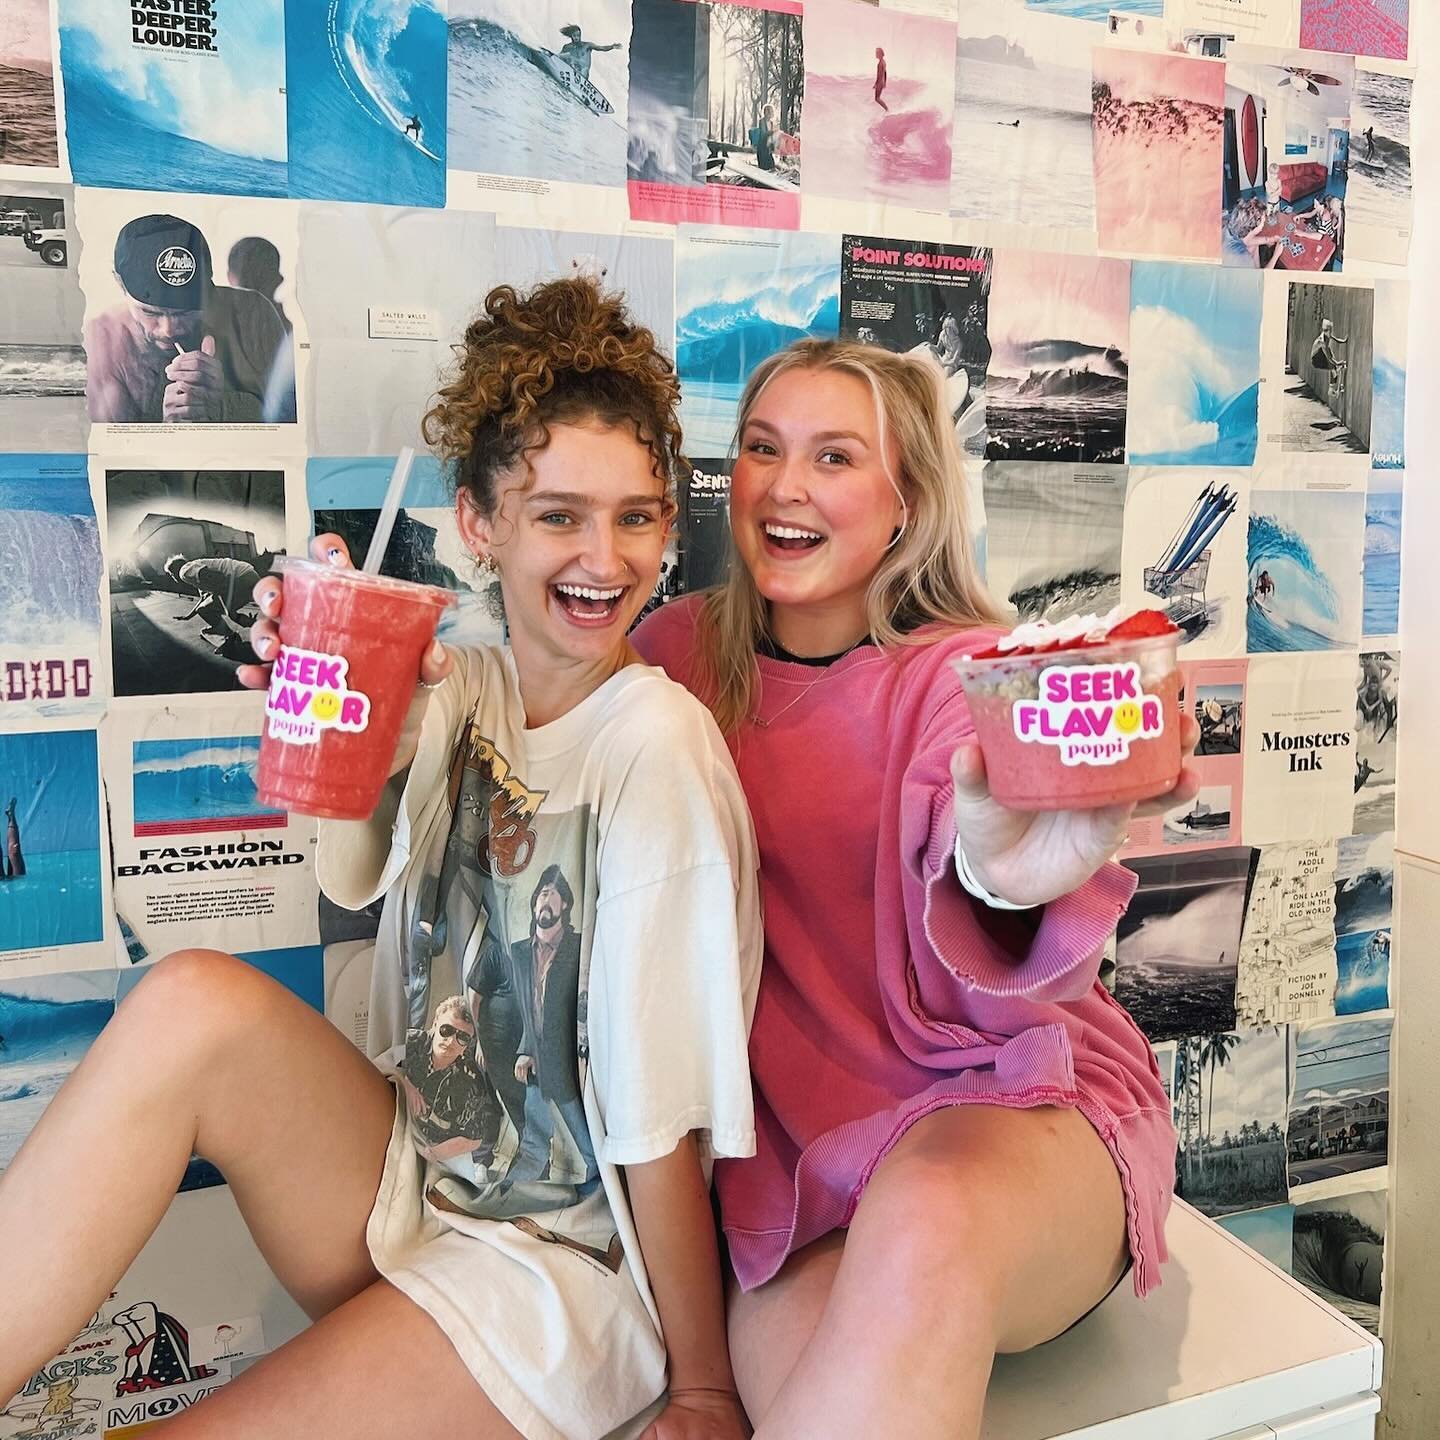 THE BEST MONTH WITH @drinkpoppi !!!!! 🥤😃🫧🍋🍓 two more days to get ur hands on a poppi bowl!!!!!!!! 🏃&zwj;♀️🏃&zwj;♀️🏃&zwj;♀️